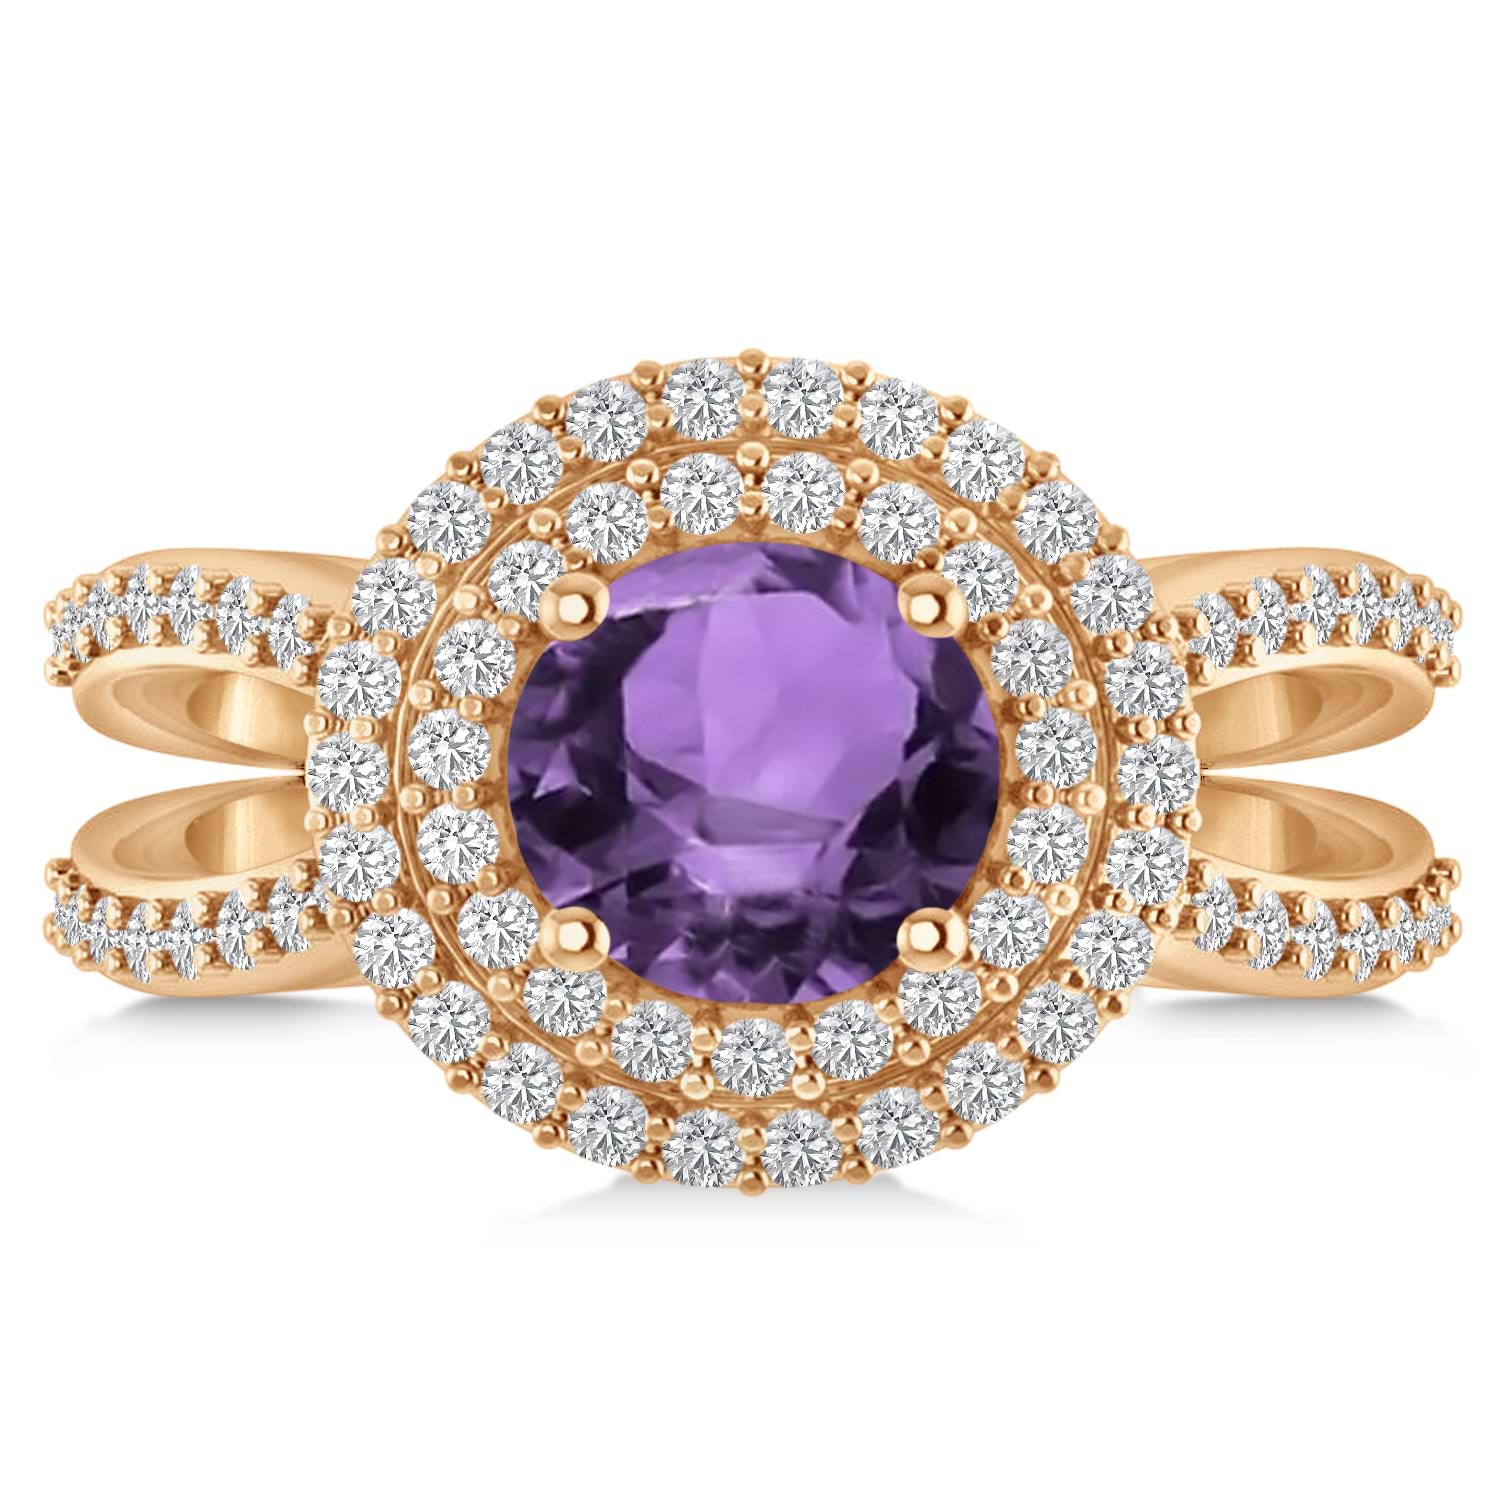 Double Halo Amethyst Engagement Ring 14k Rose Gold (2.27ct)